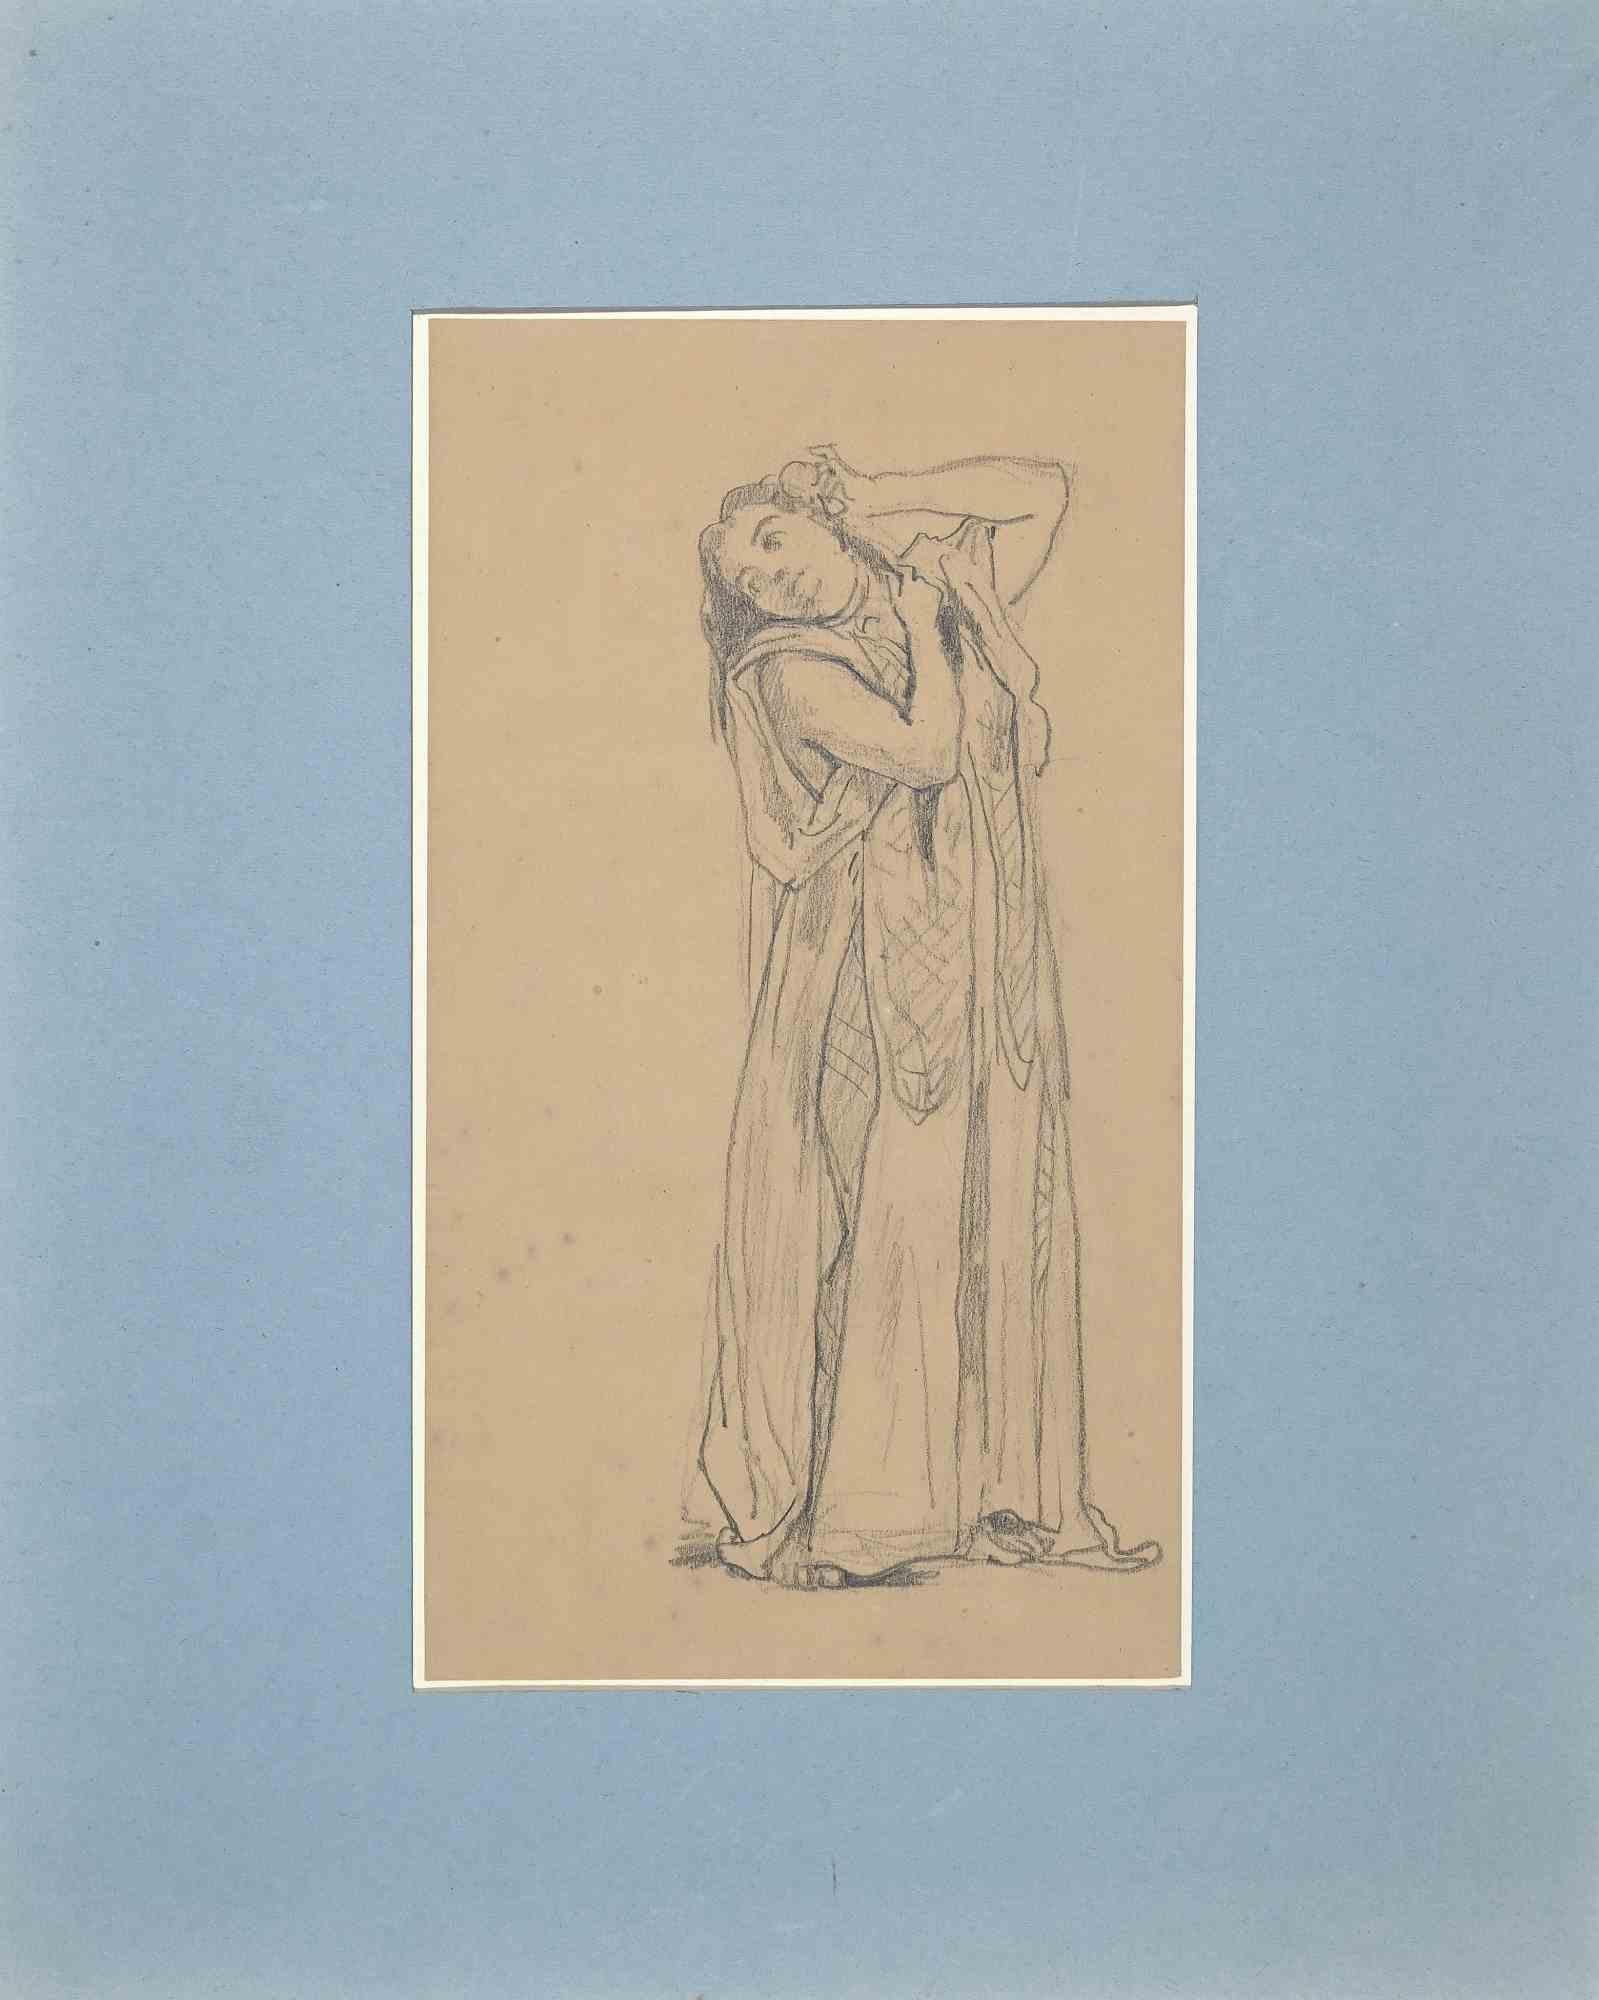 Young Lady is an Original Drawing in pencil realized by Eugène Giraud in the Late 19th Century.

Applied on a Cardboard, included a blue Passepartout: 41 x 33 cm

Good conditions.

The delicate and beautiful fine strokes of the artwork show the